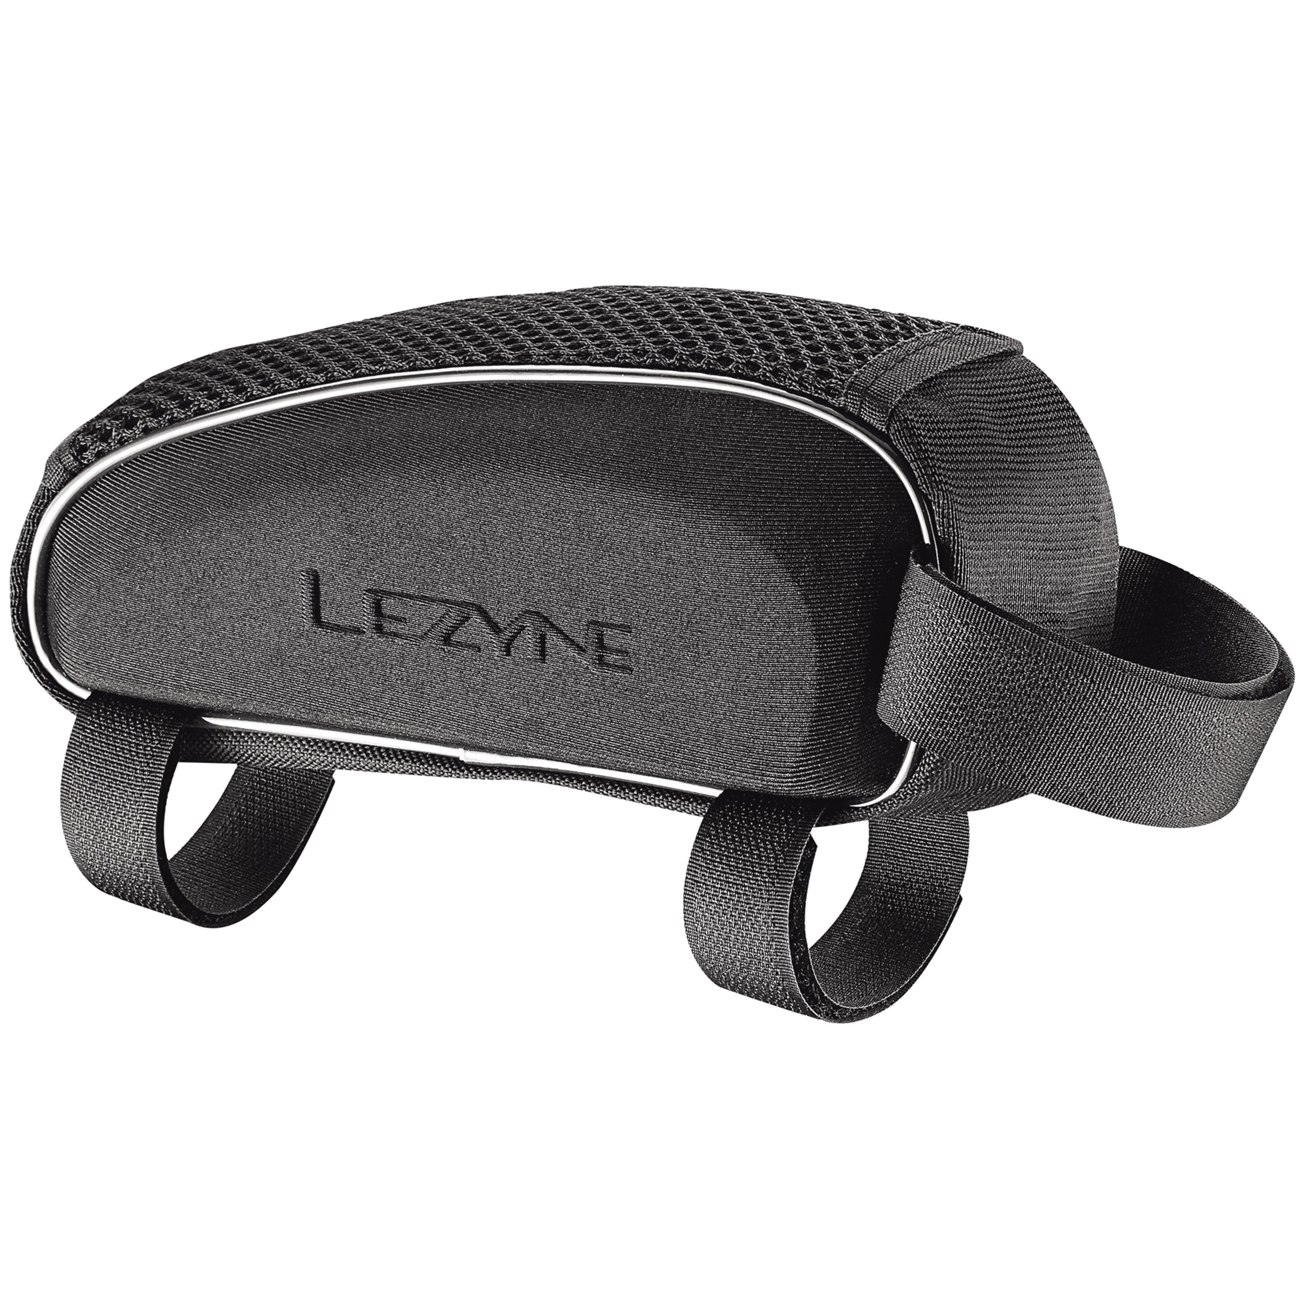 Picture of Lezyne Energy Caddy Frame Bag - black